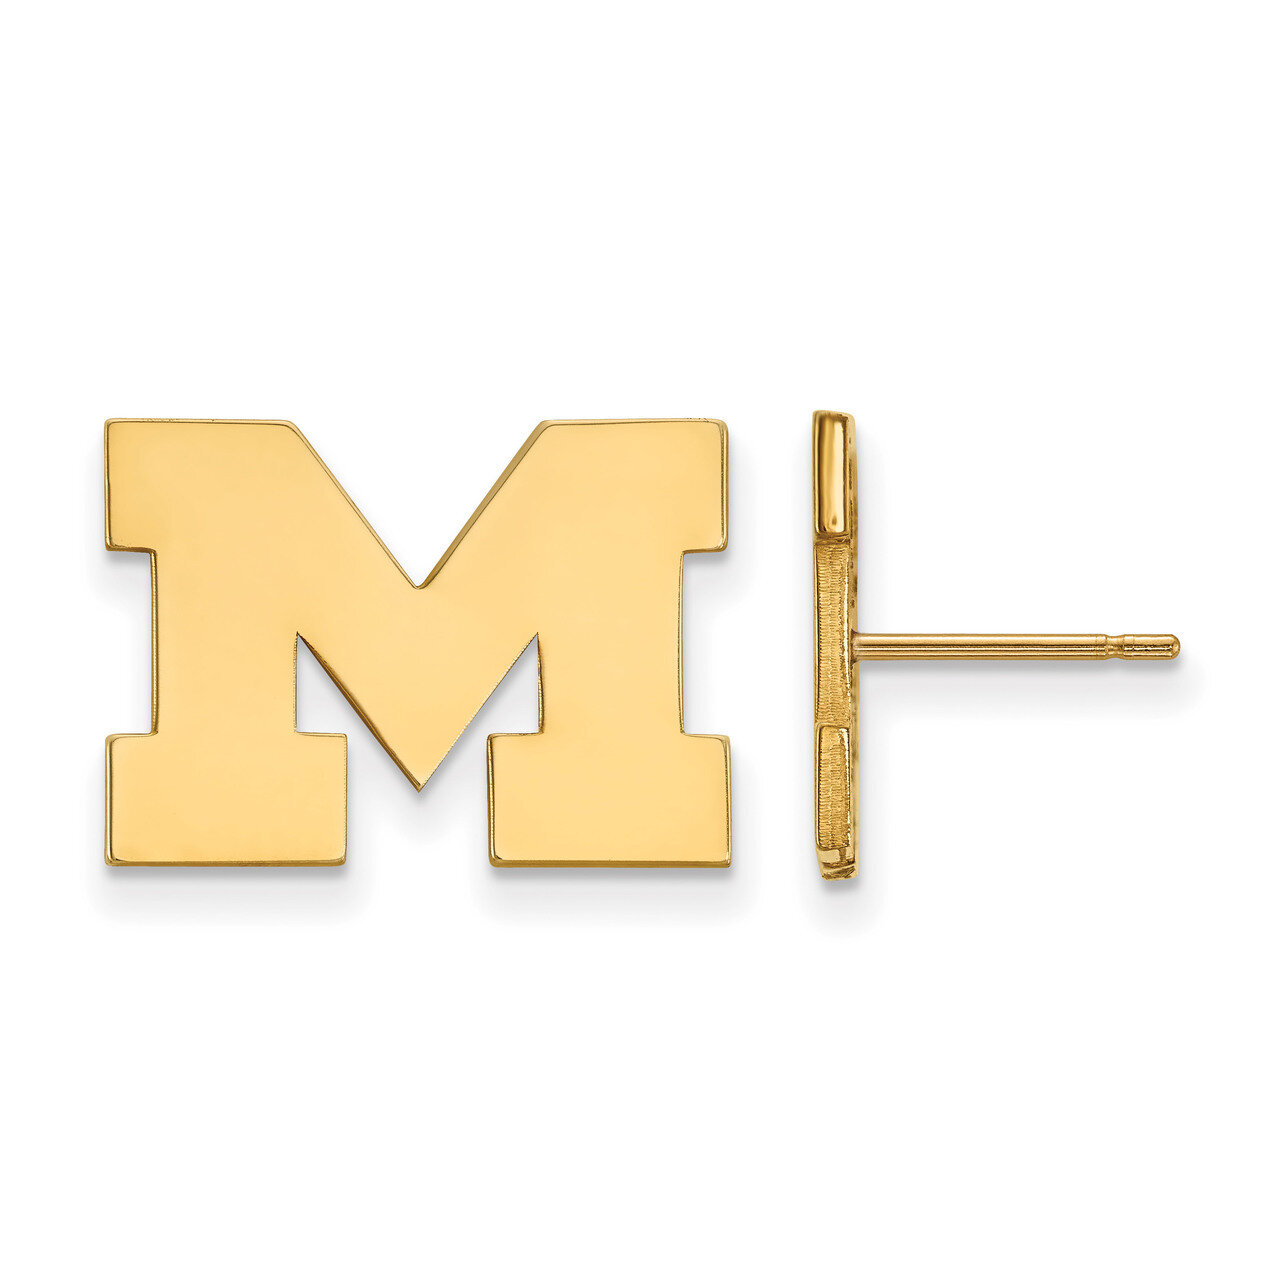 Michigan University of Small Post Earrings Gold-plated Sterling Silver GP009UM